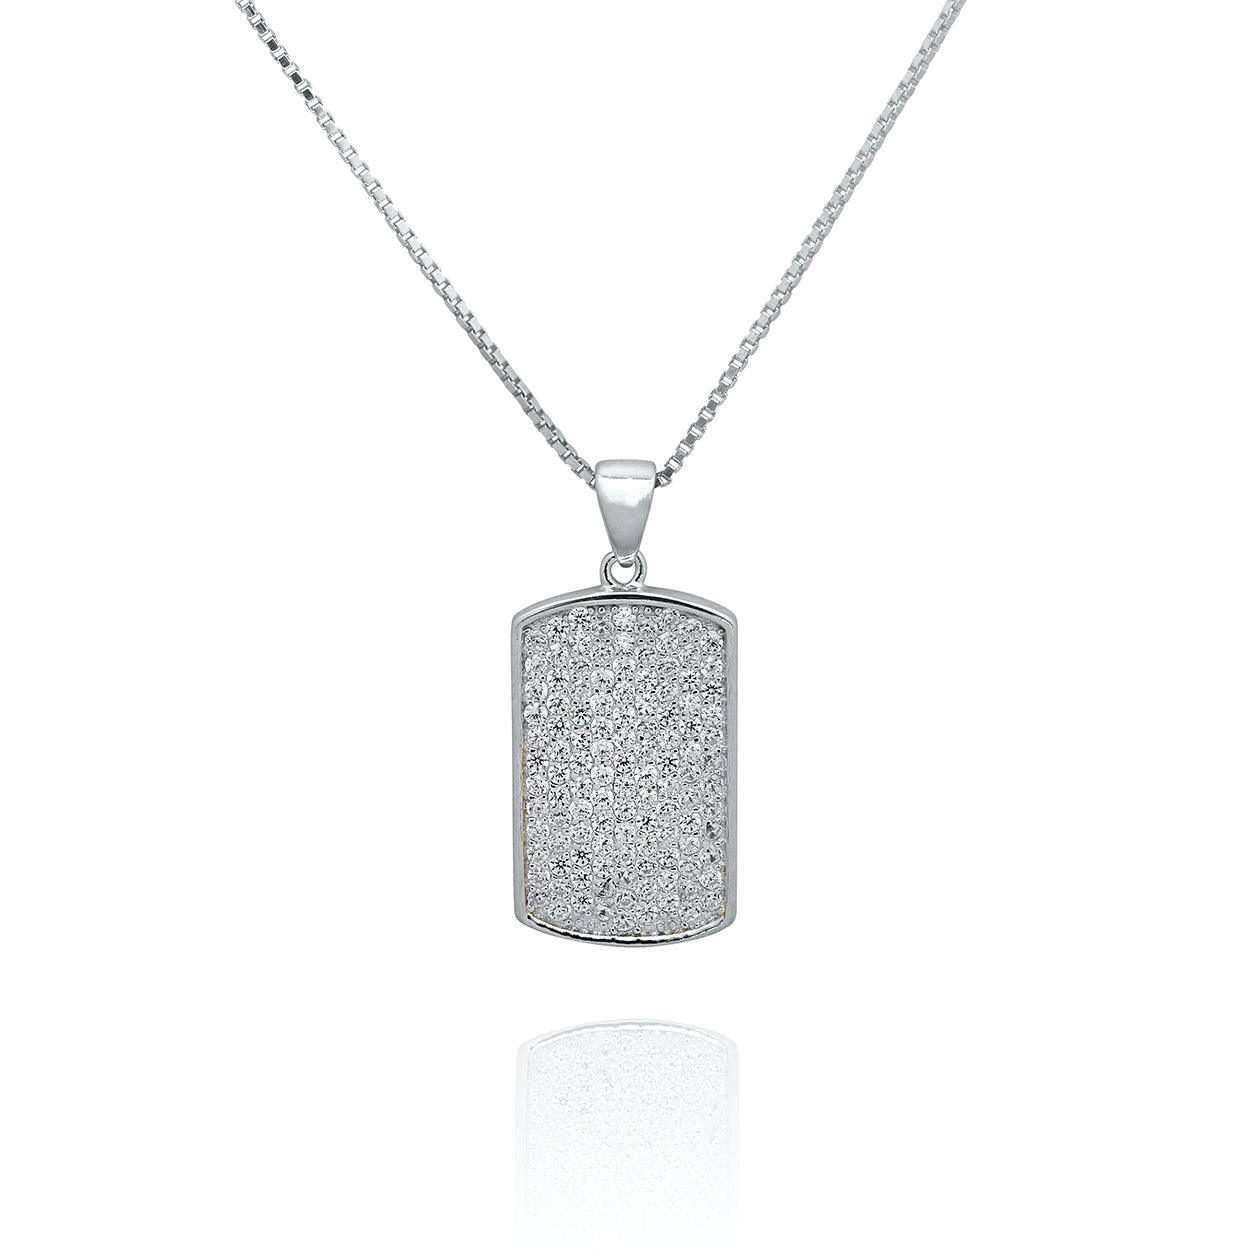 Sterling Silver Rhodium Plated Dog Tag Pendant set with Cubic Zirconia on a Box Chain